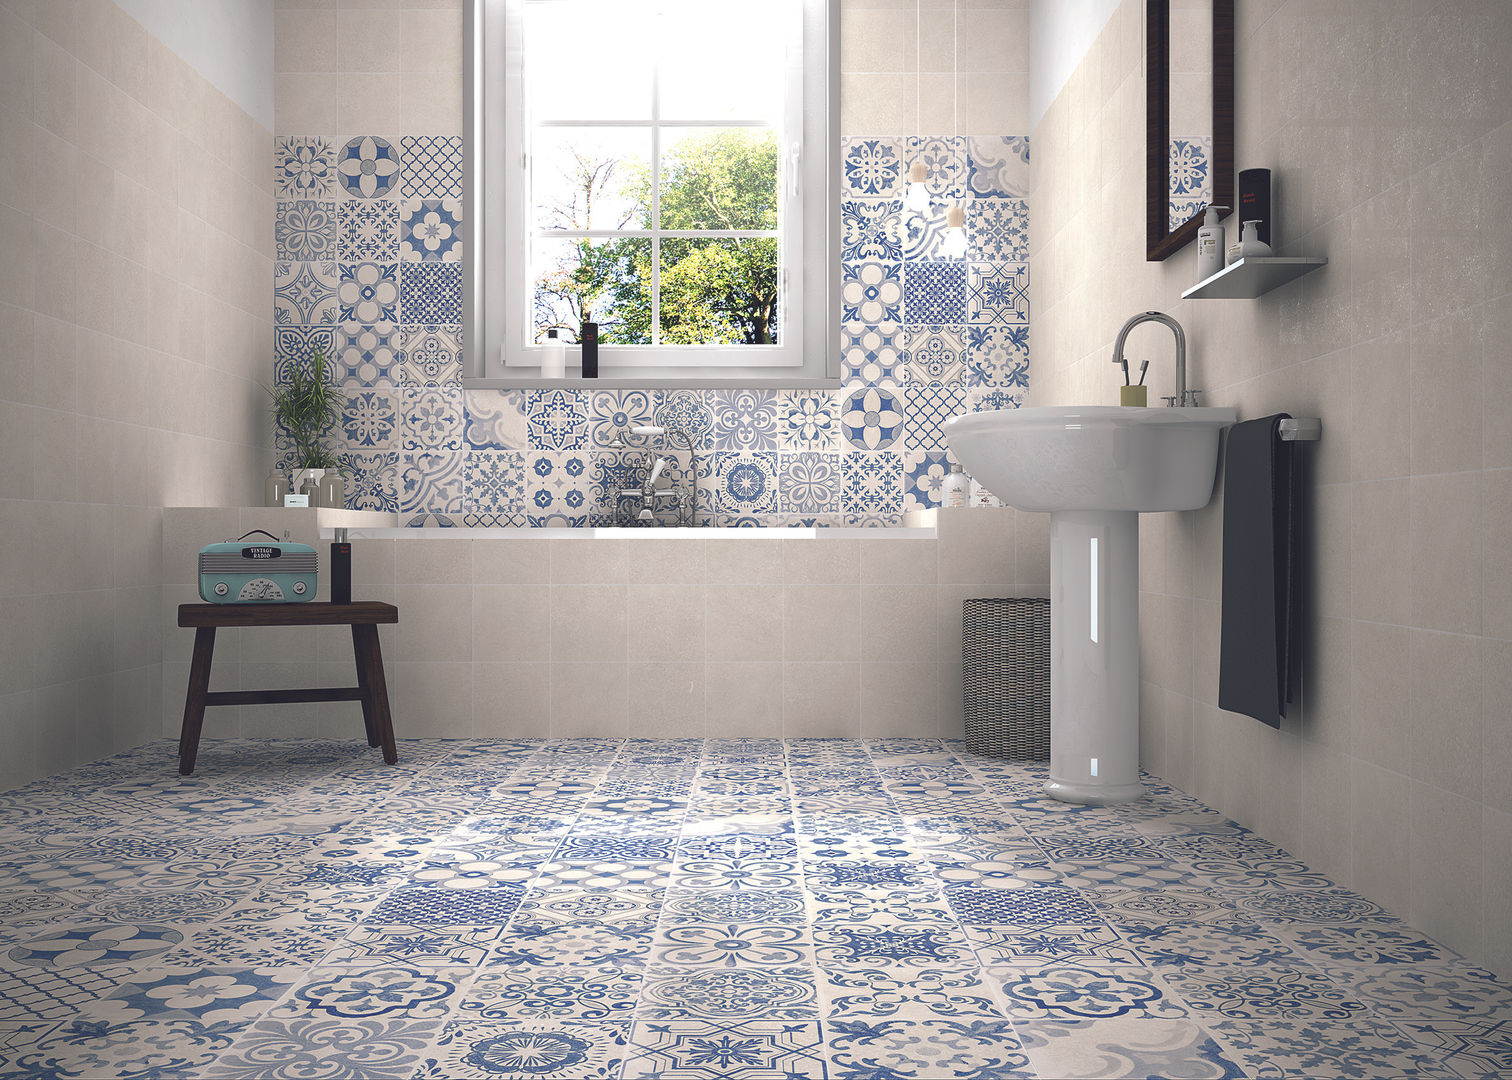 Skyros wall and floor tiles homify Paredes e pisos campestres Ladrilho